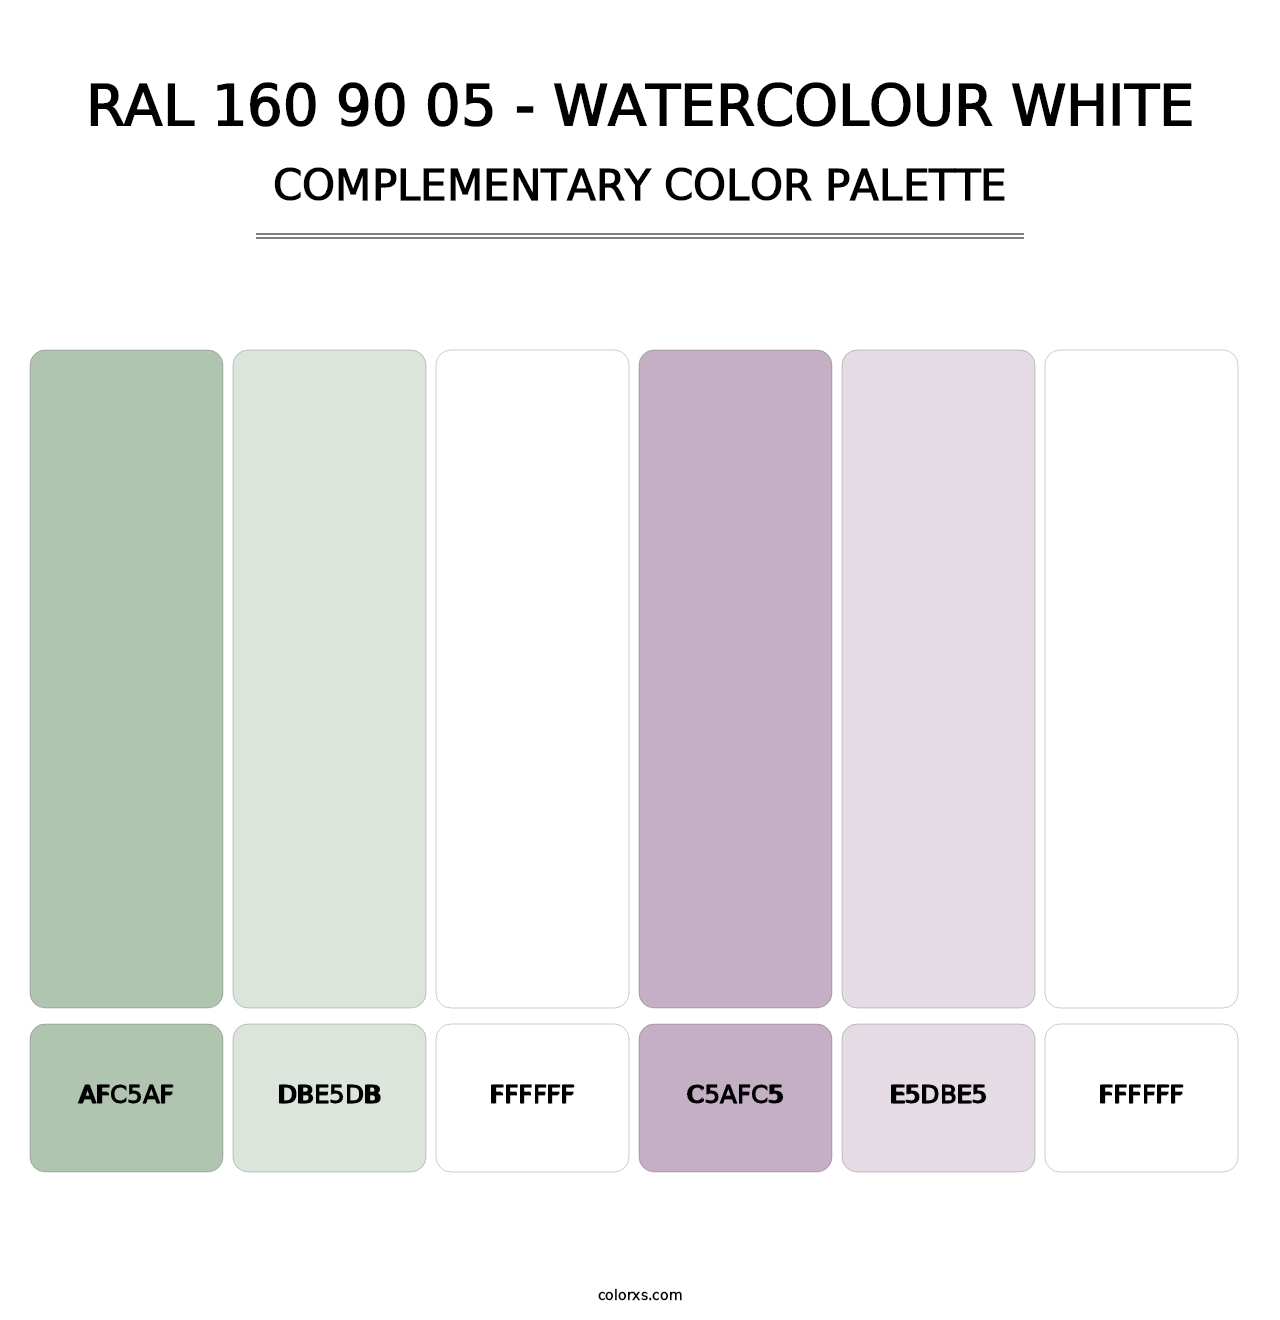 RAL 160 90 05 - Watercolour White - Complementary Color Palette